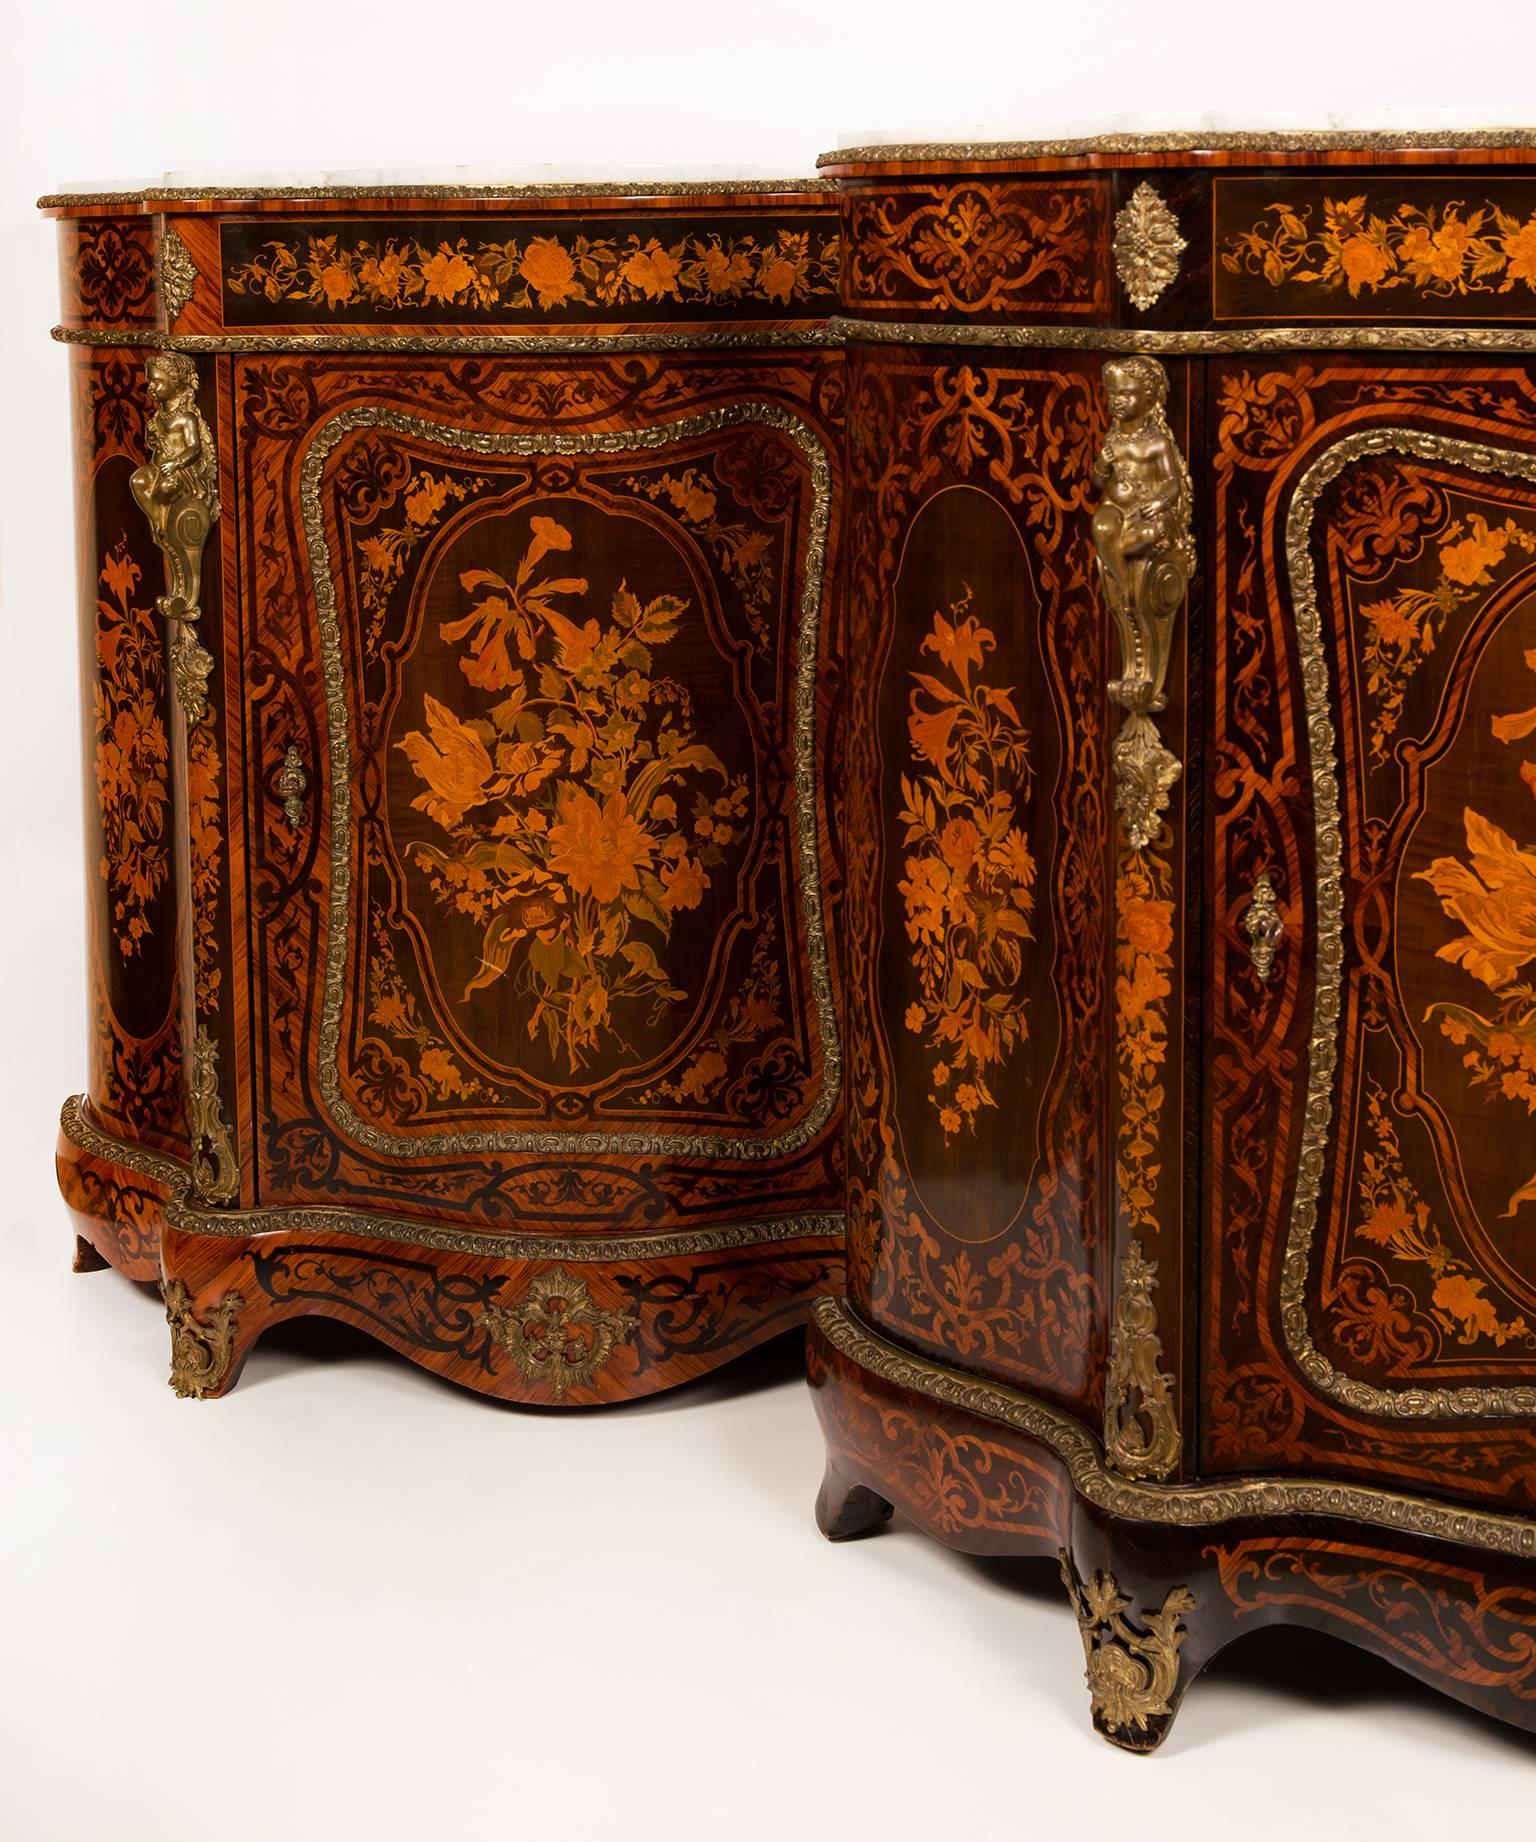 A genuine pair of meubles d´appui, with reverse inlay of floral scrolls and flower marquetry of profusely colored and stained woods. Strapwork borders and bronze ornaments of sitting figures on the corners.
The interior of each cabinet has two